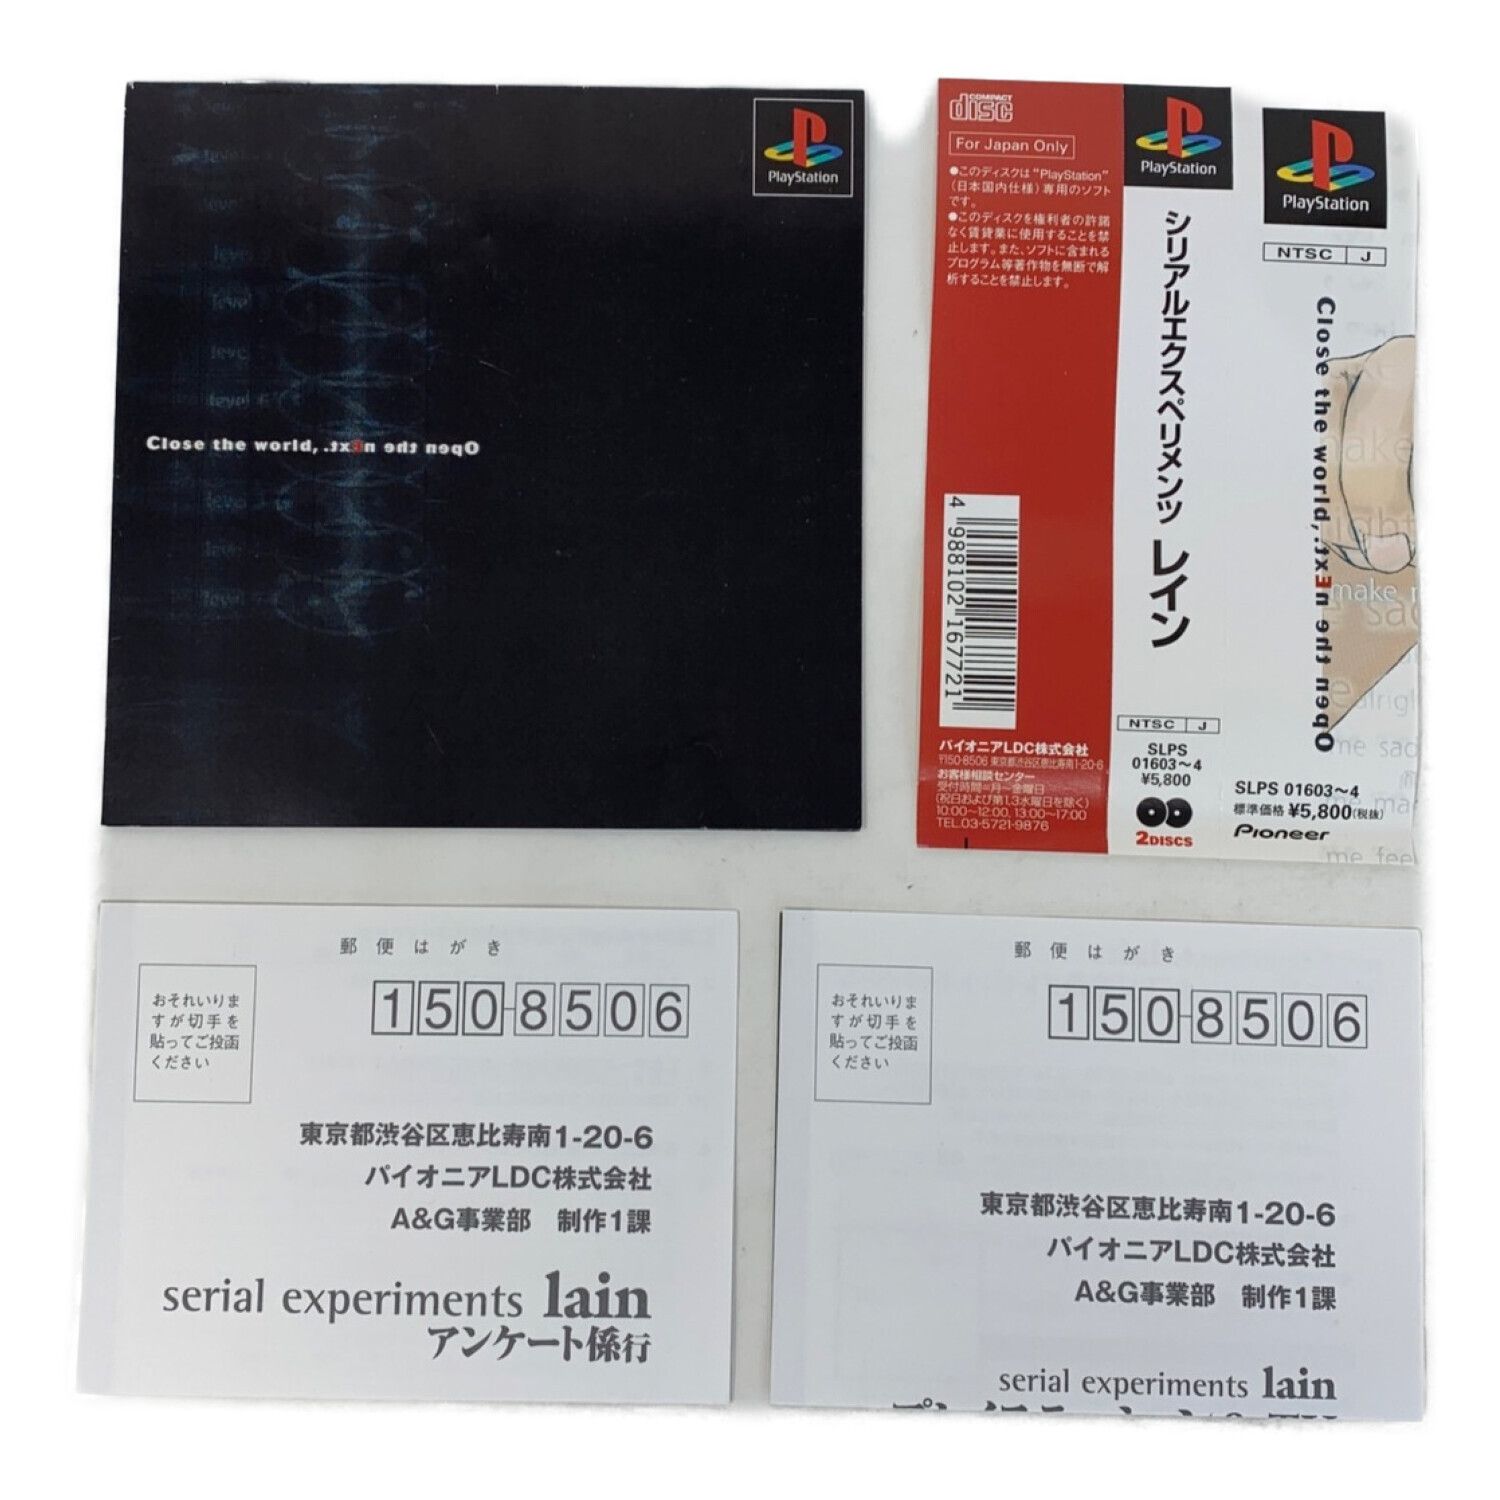 Playstation用ソフト 帯・ハガキ・説明書付 ディスクキズなし 動作 ...